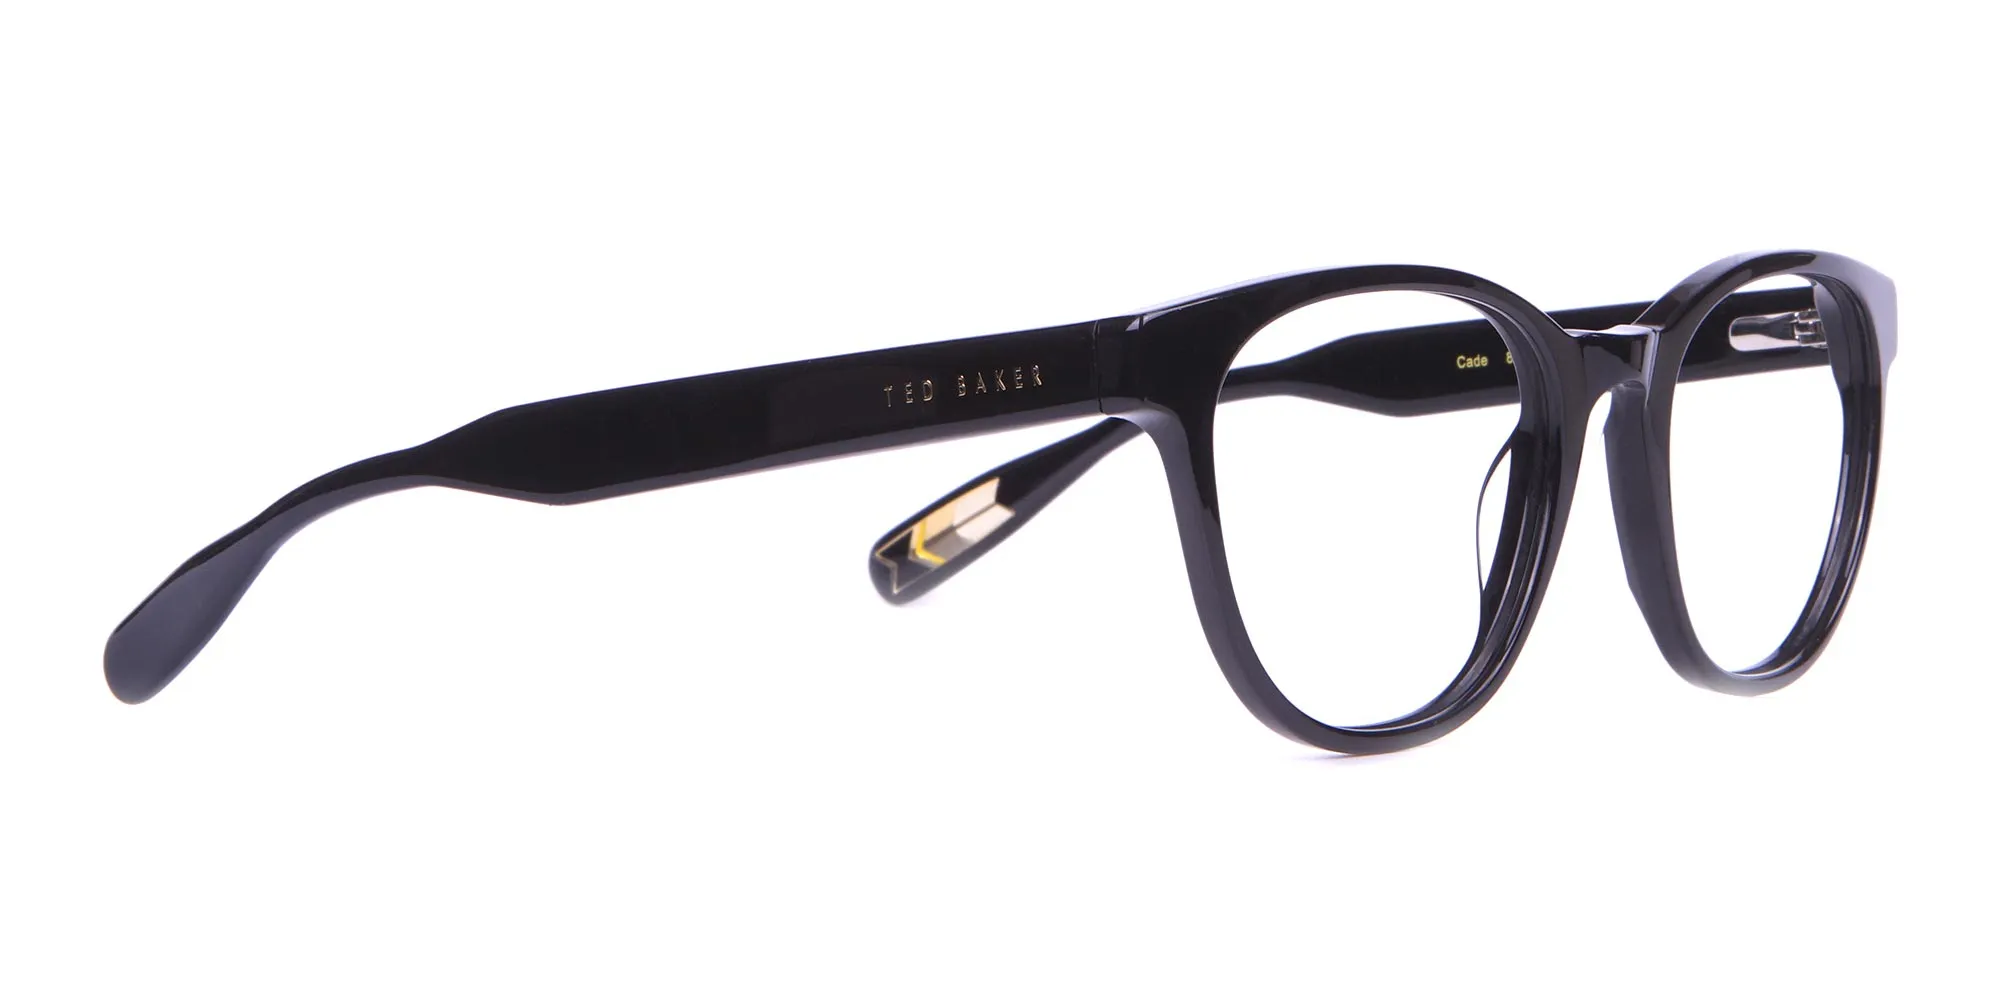 TED BAKER TB8197 Cade Glasses Classic Round Black Chunky-2